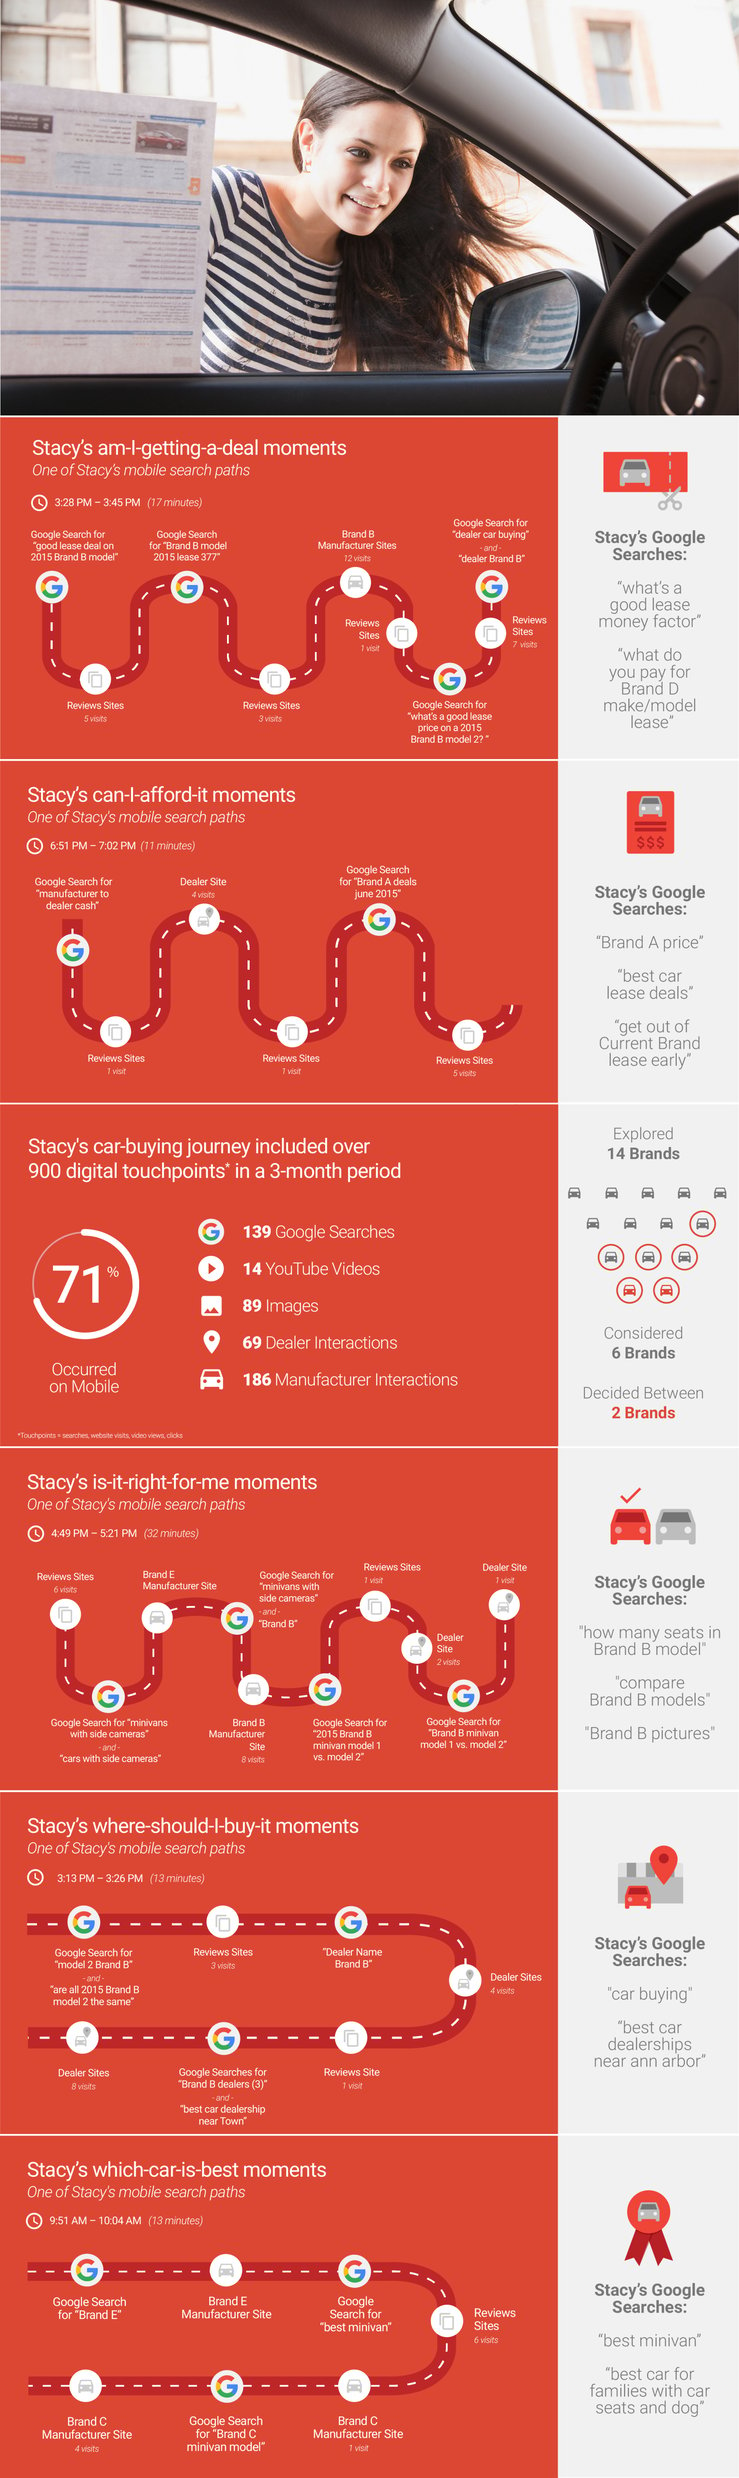 Car Buyer Journey Micro-Moments infographic.png